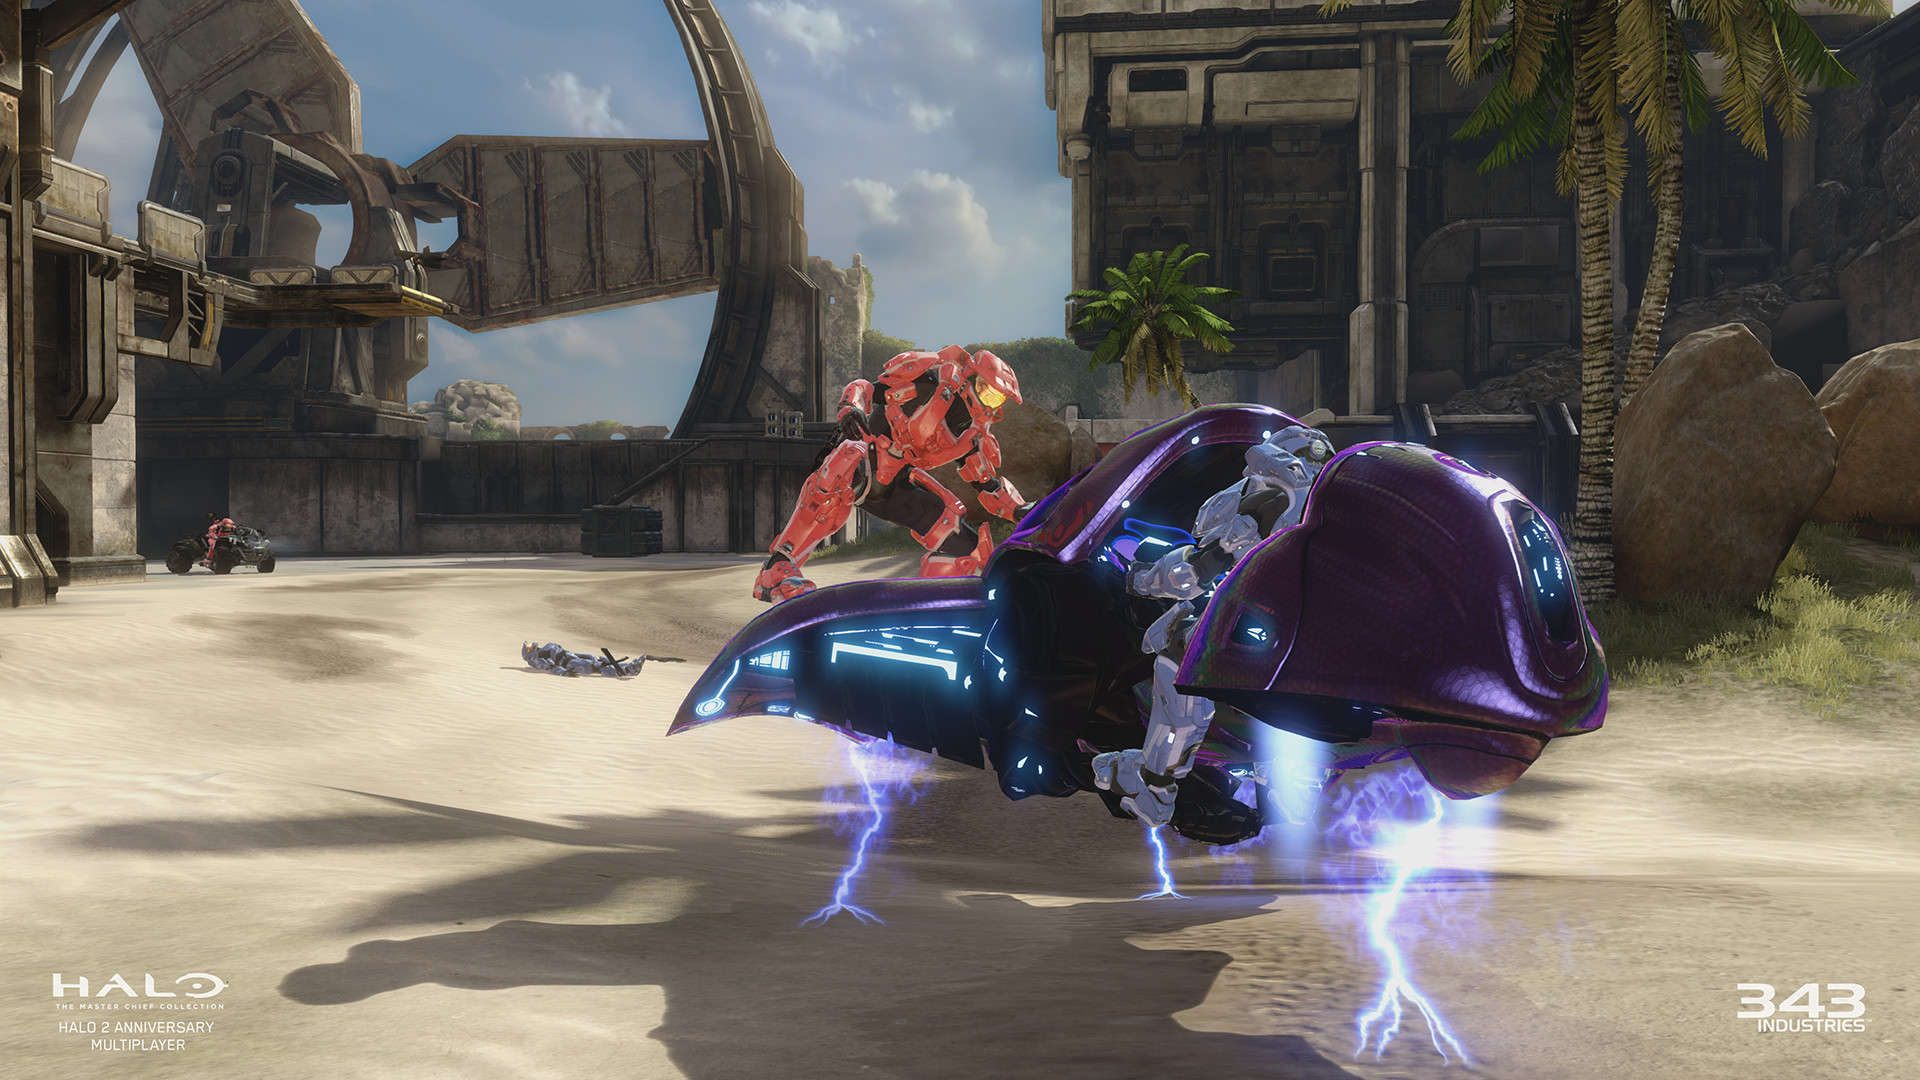 Halo: The Master Chief Collection - screenshot 2